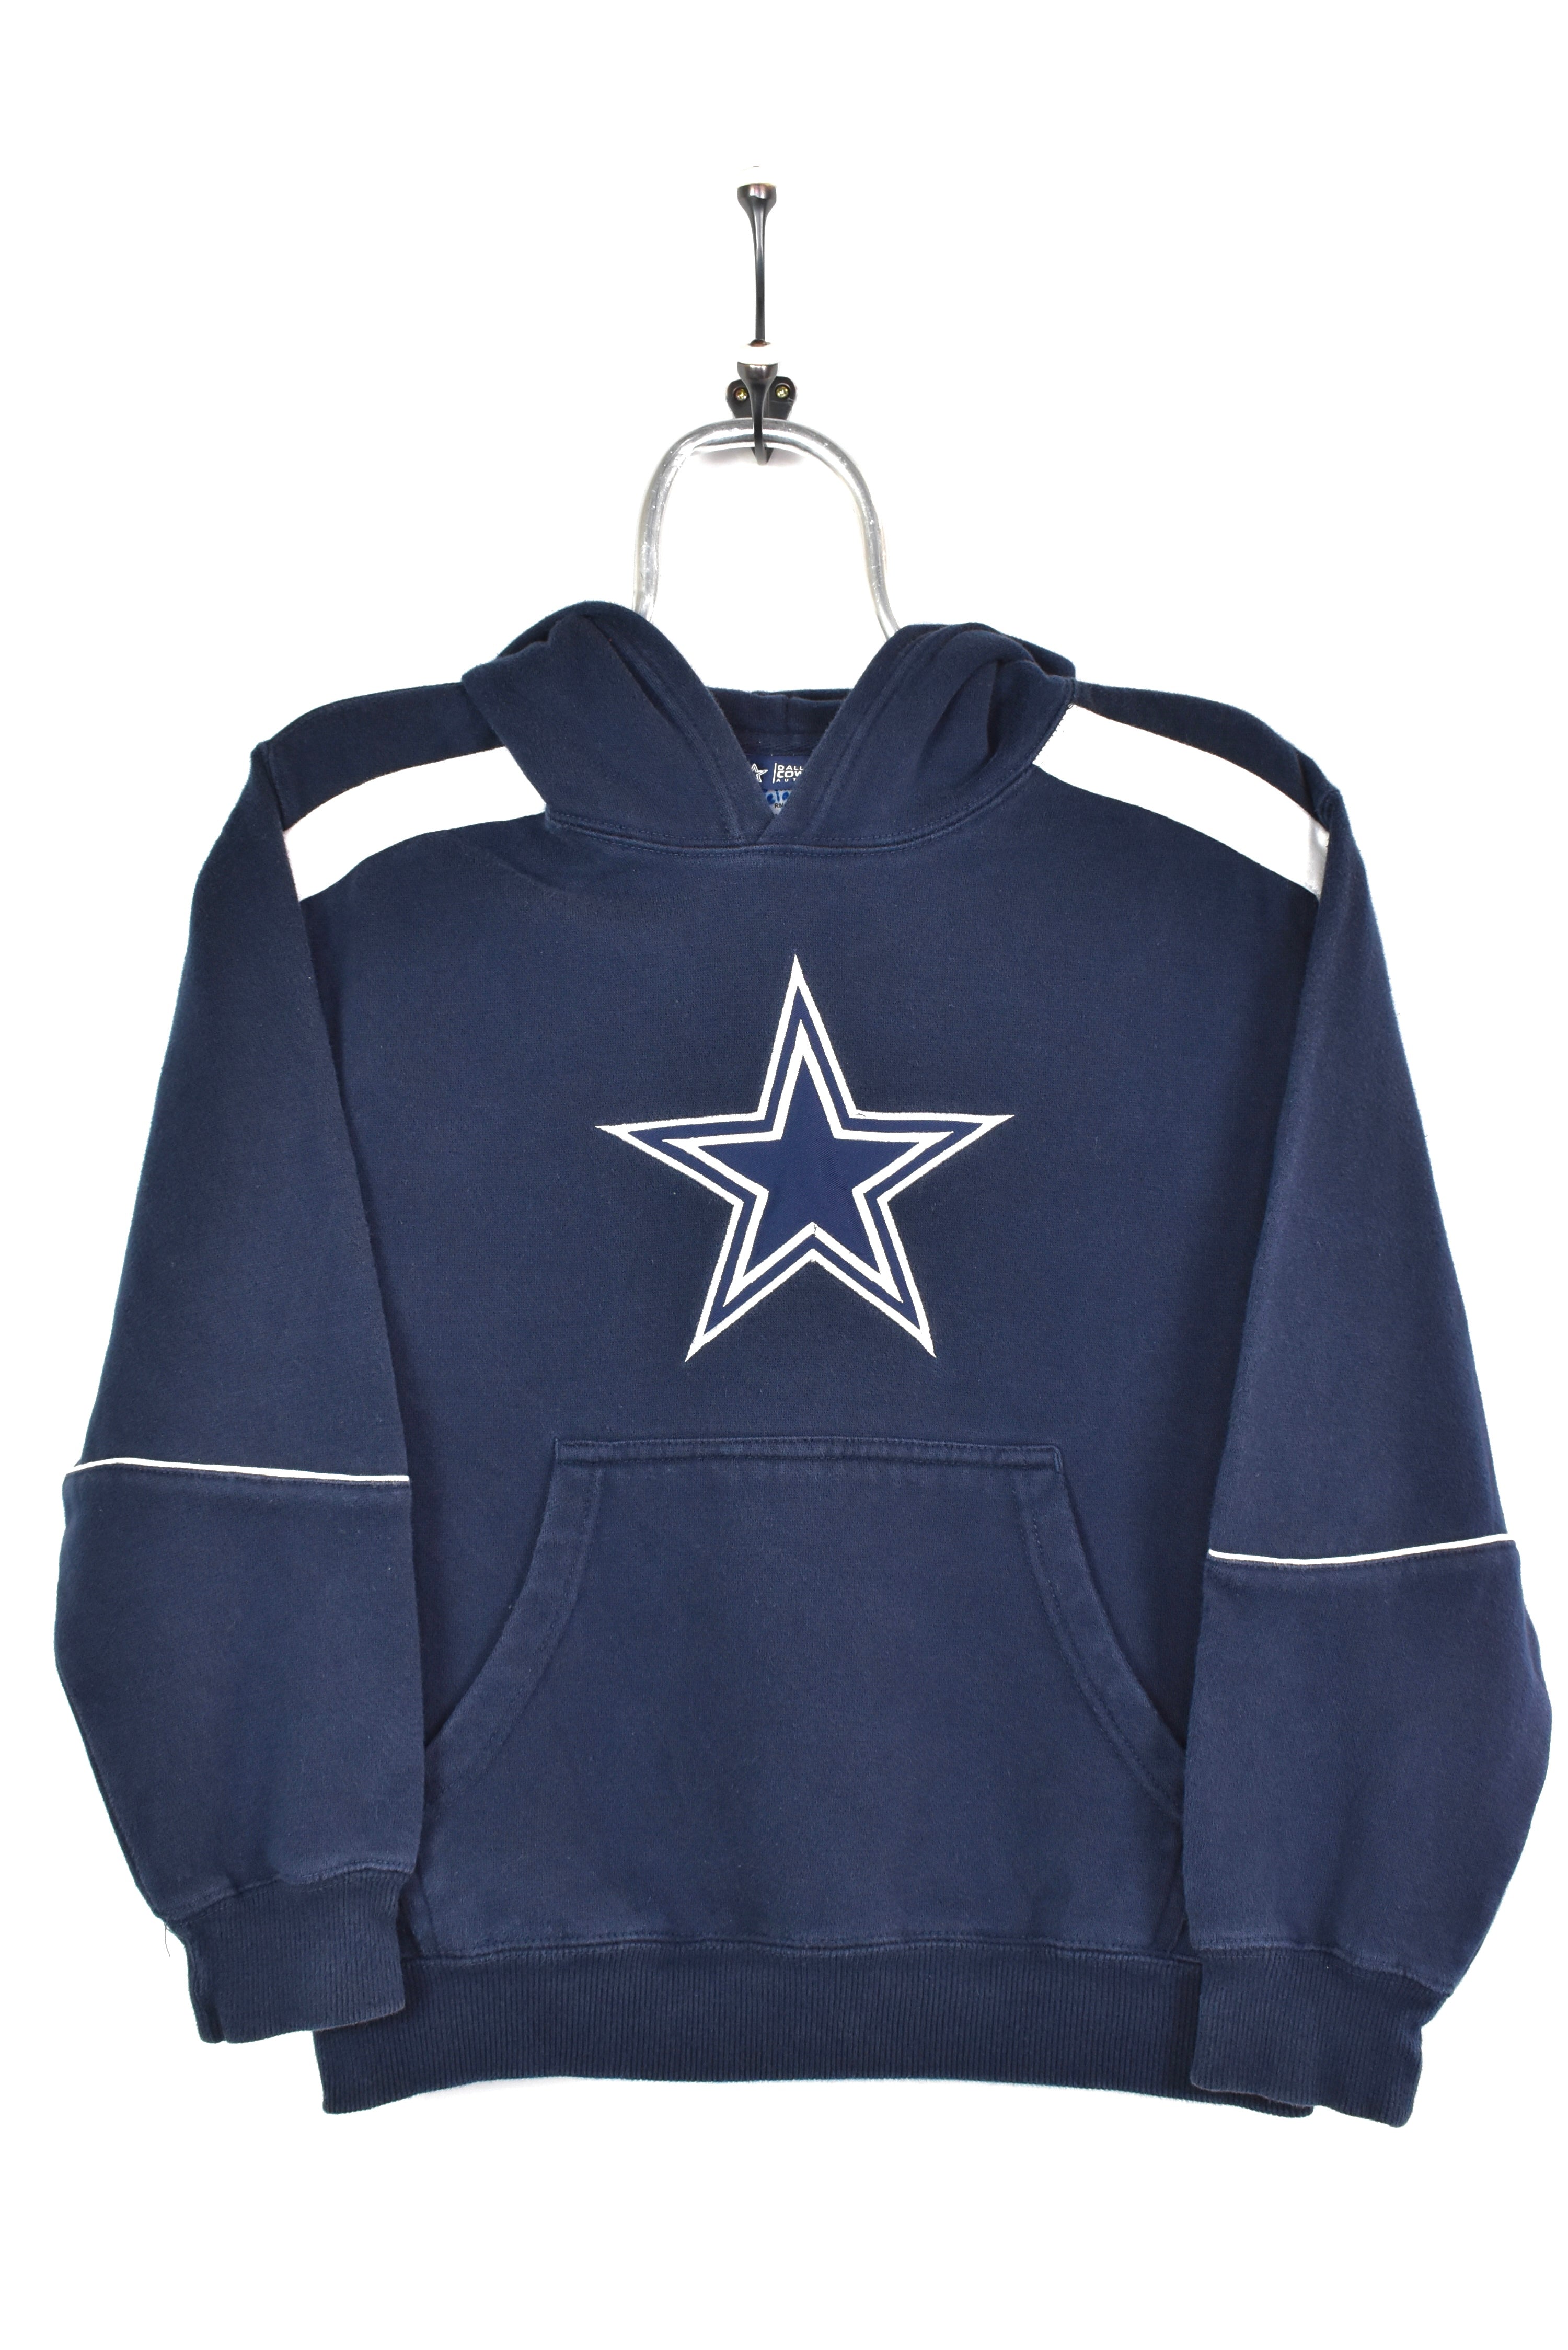 VINTAGE WOMEN'S NFL DALLAS COWBOYS EMBROIDERED HOODIE | SMALL PRO SPORT